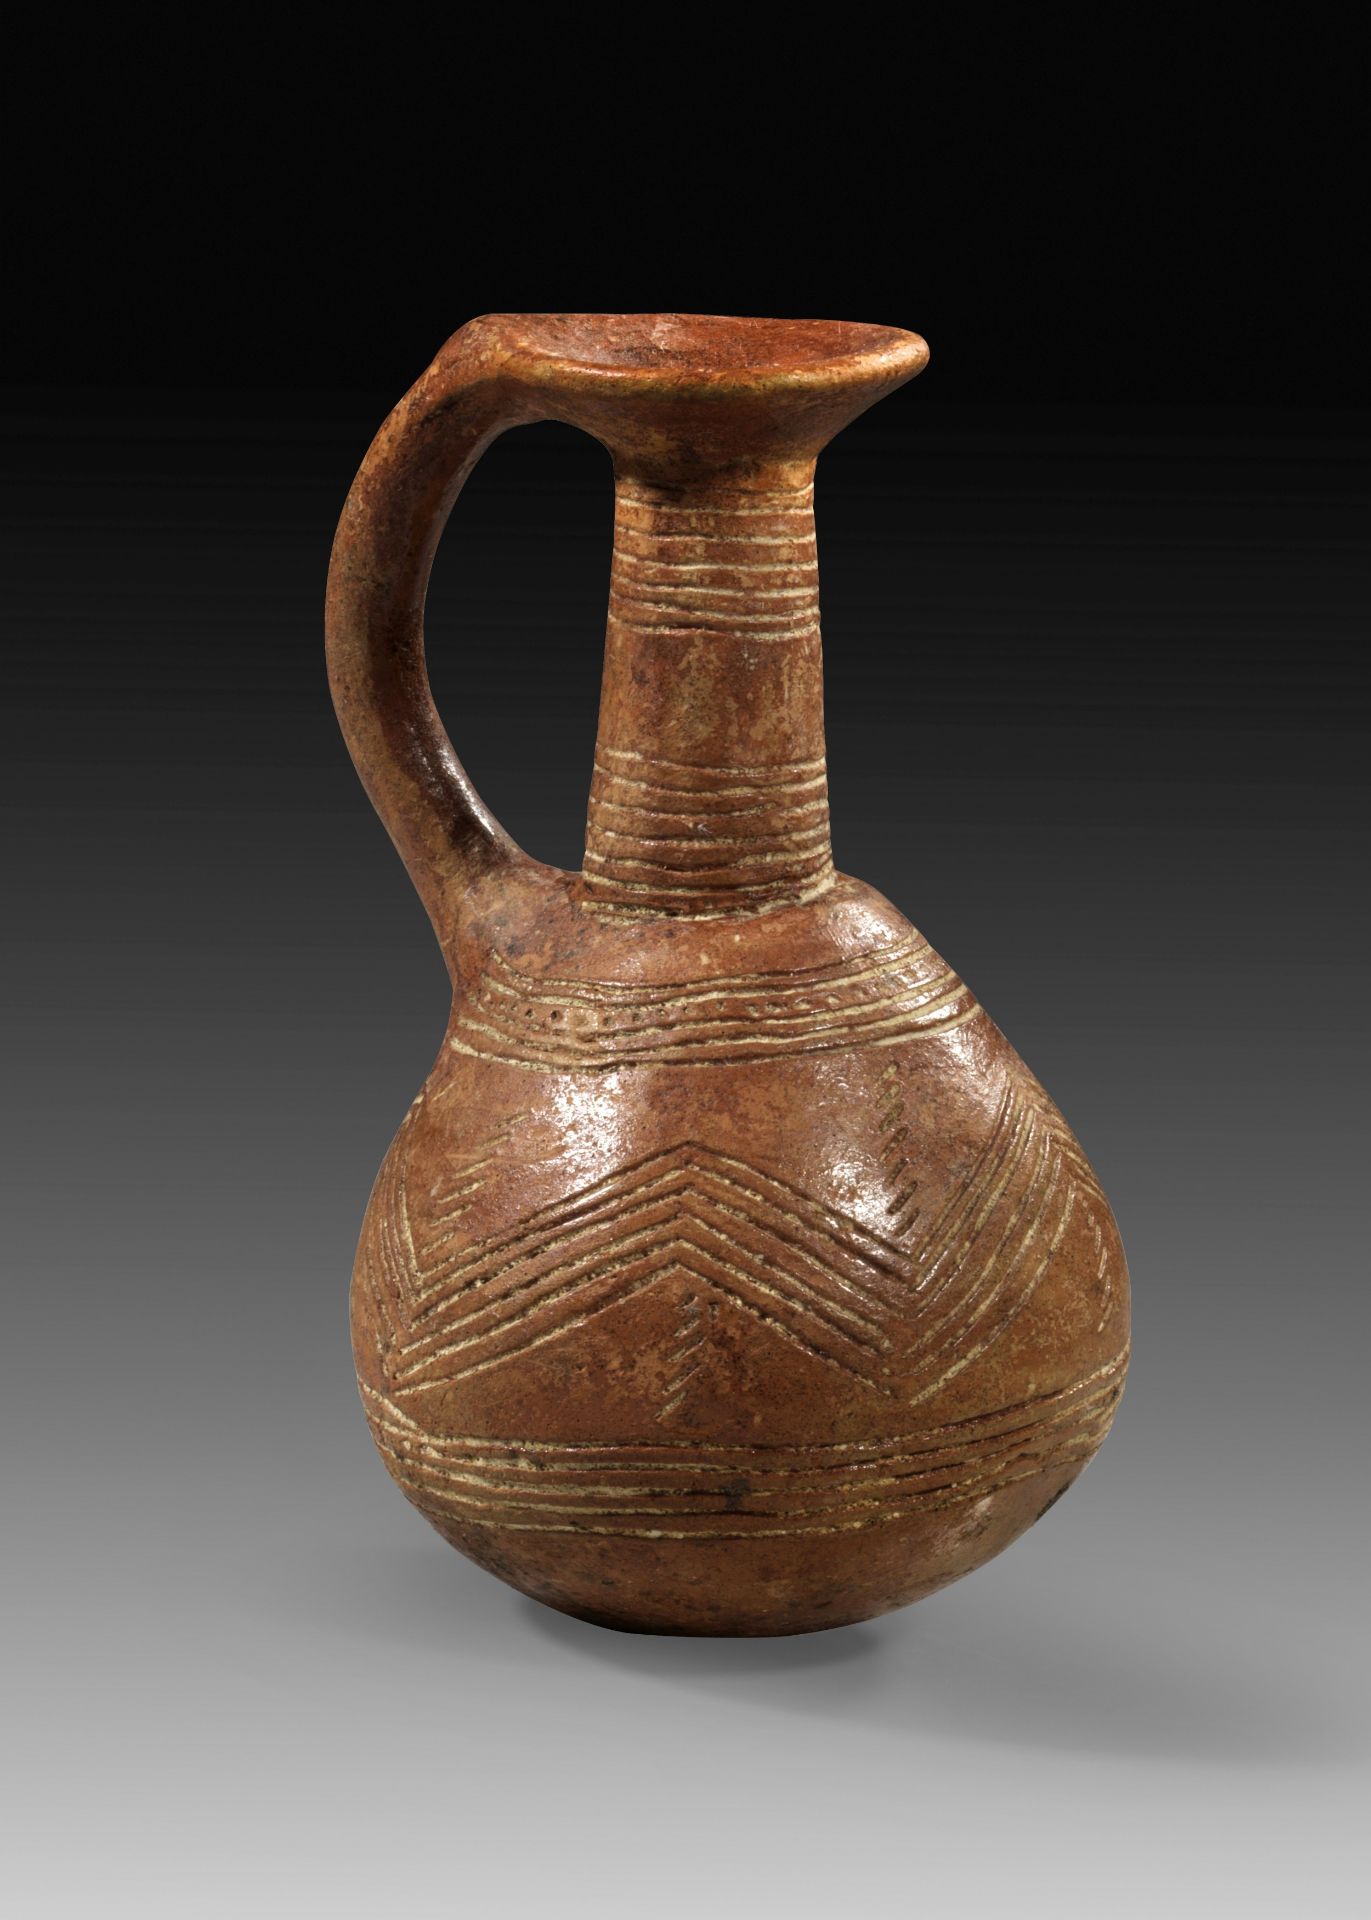 lask of the Incised Red Polished Ware.